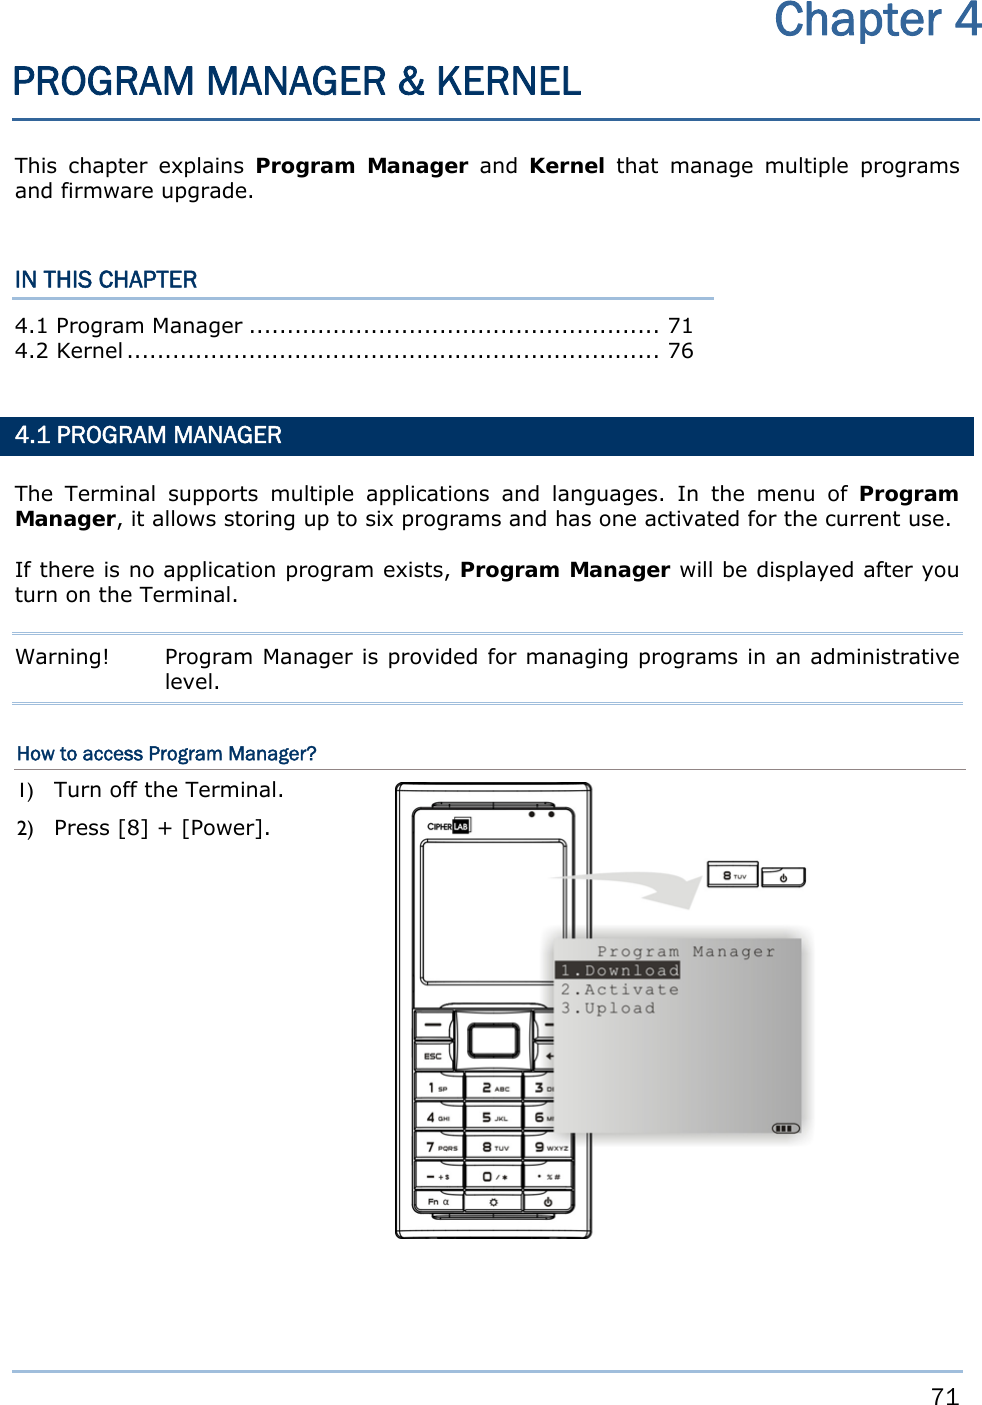     71   This chapter explains Program Manager and Kernel that manage multiple programs and firmware upgrade.  IN THIS CHAPTER 4.1 Program Manager ...................................................... 71 4.2 Kernel ......................................................................  76   4.1 PROGRAM MANAGER The Terminal supports multiple applications and languages. In the menu of Program Manager, it allows storing up to six programs and has one activated for the current use. If there is no application program exists, Program Manager will be displayed after you turn on the Terminal. Warning!  Program Manager is provided for managing programs in an administrative level. How to access Program Manager? 1) Turn off the Terminal. 2) Press [8] + [Power].                Chapter 4 PROGRAM MANAGER &amp; KERNEL 